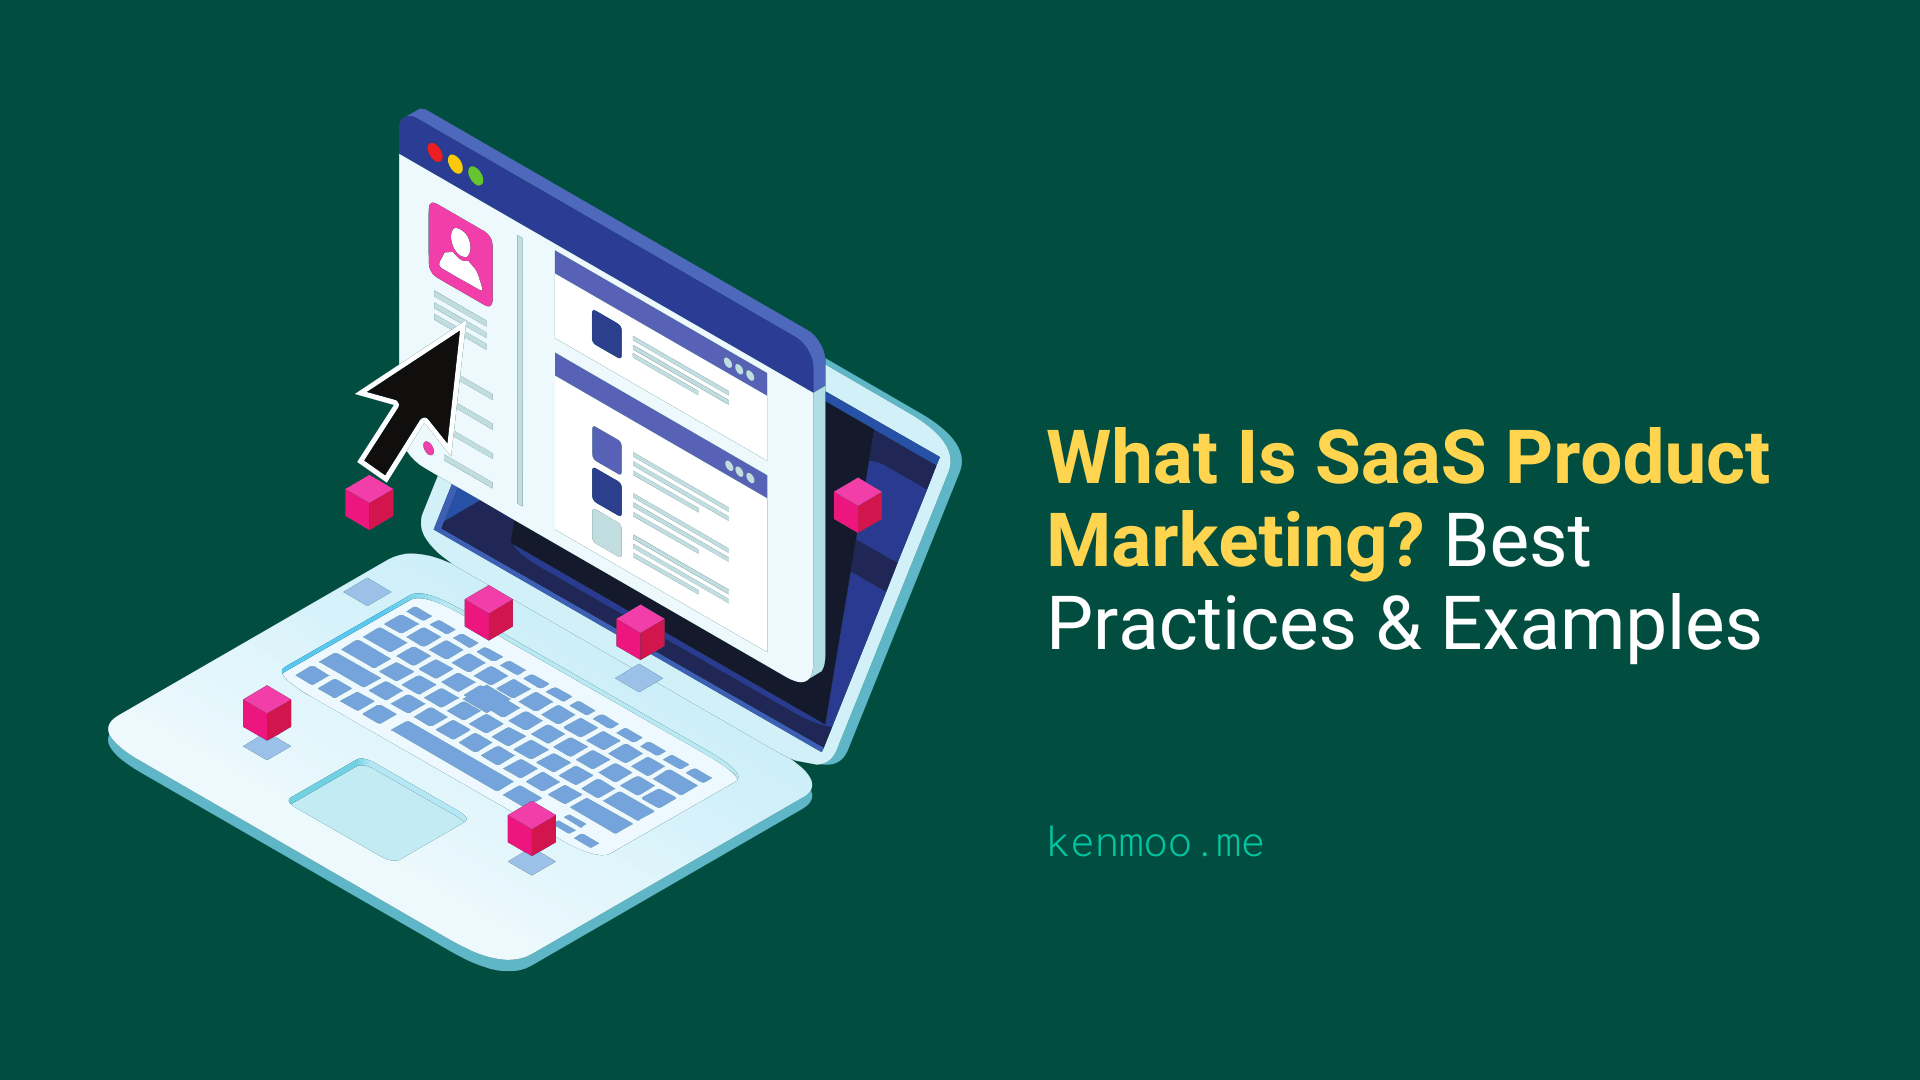 What Is SaaS Product Marketing? Best Practices & Examples